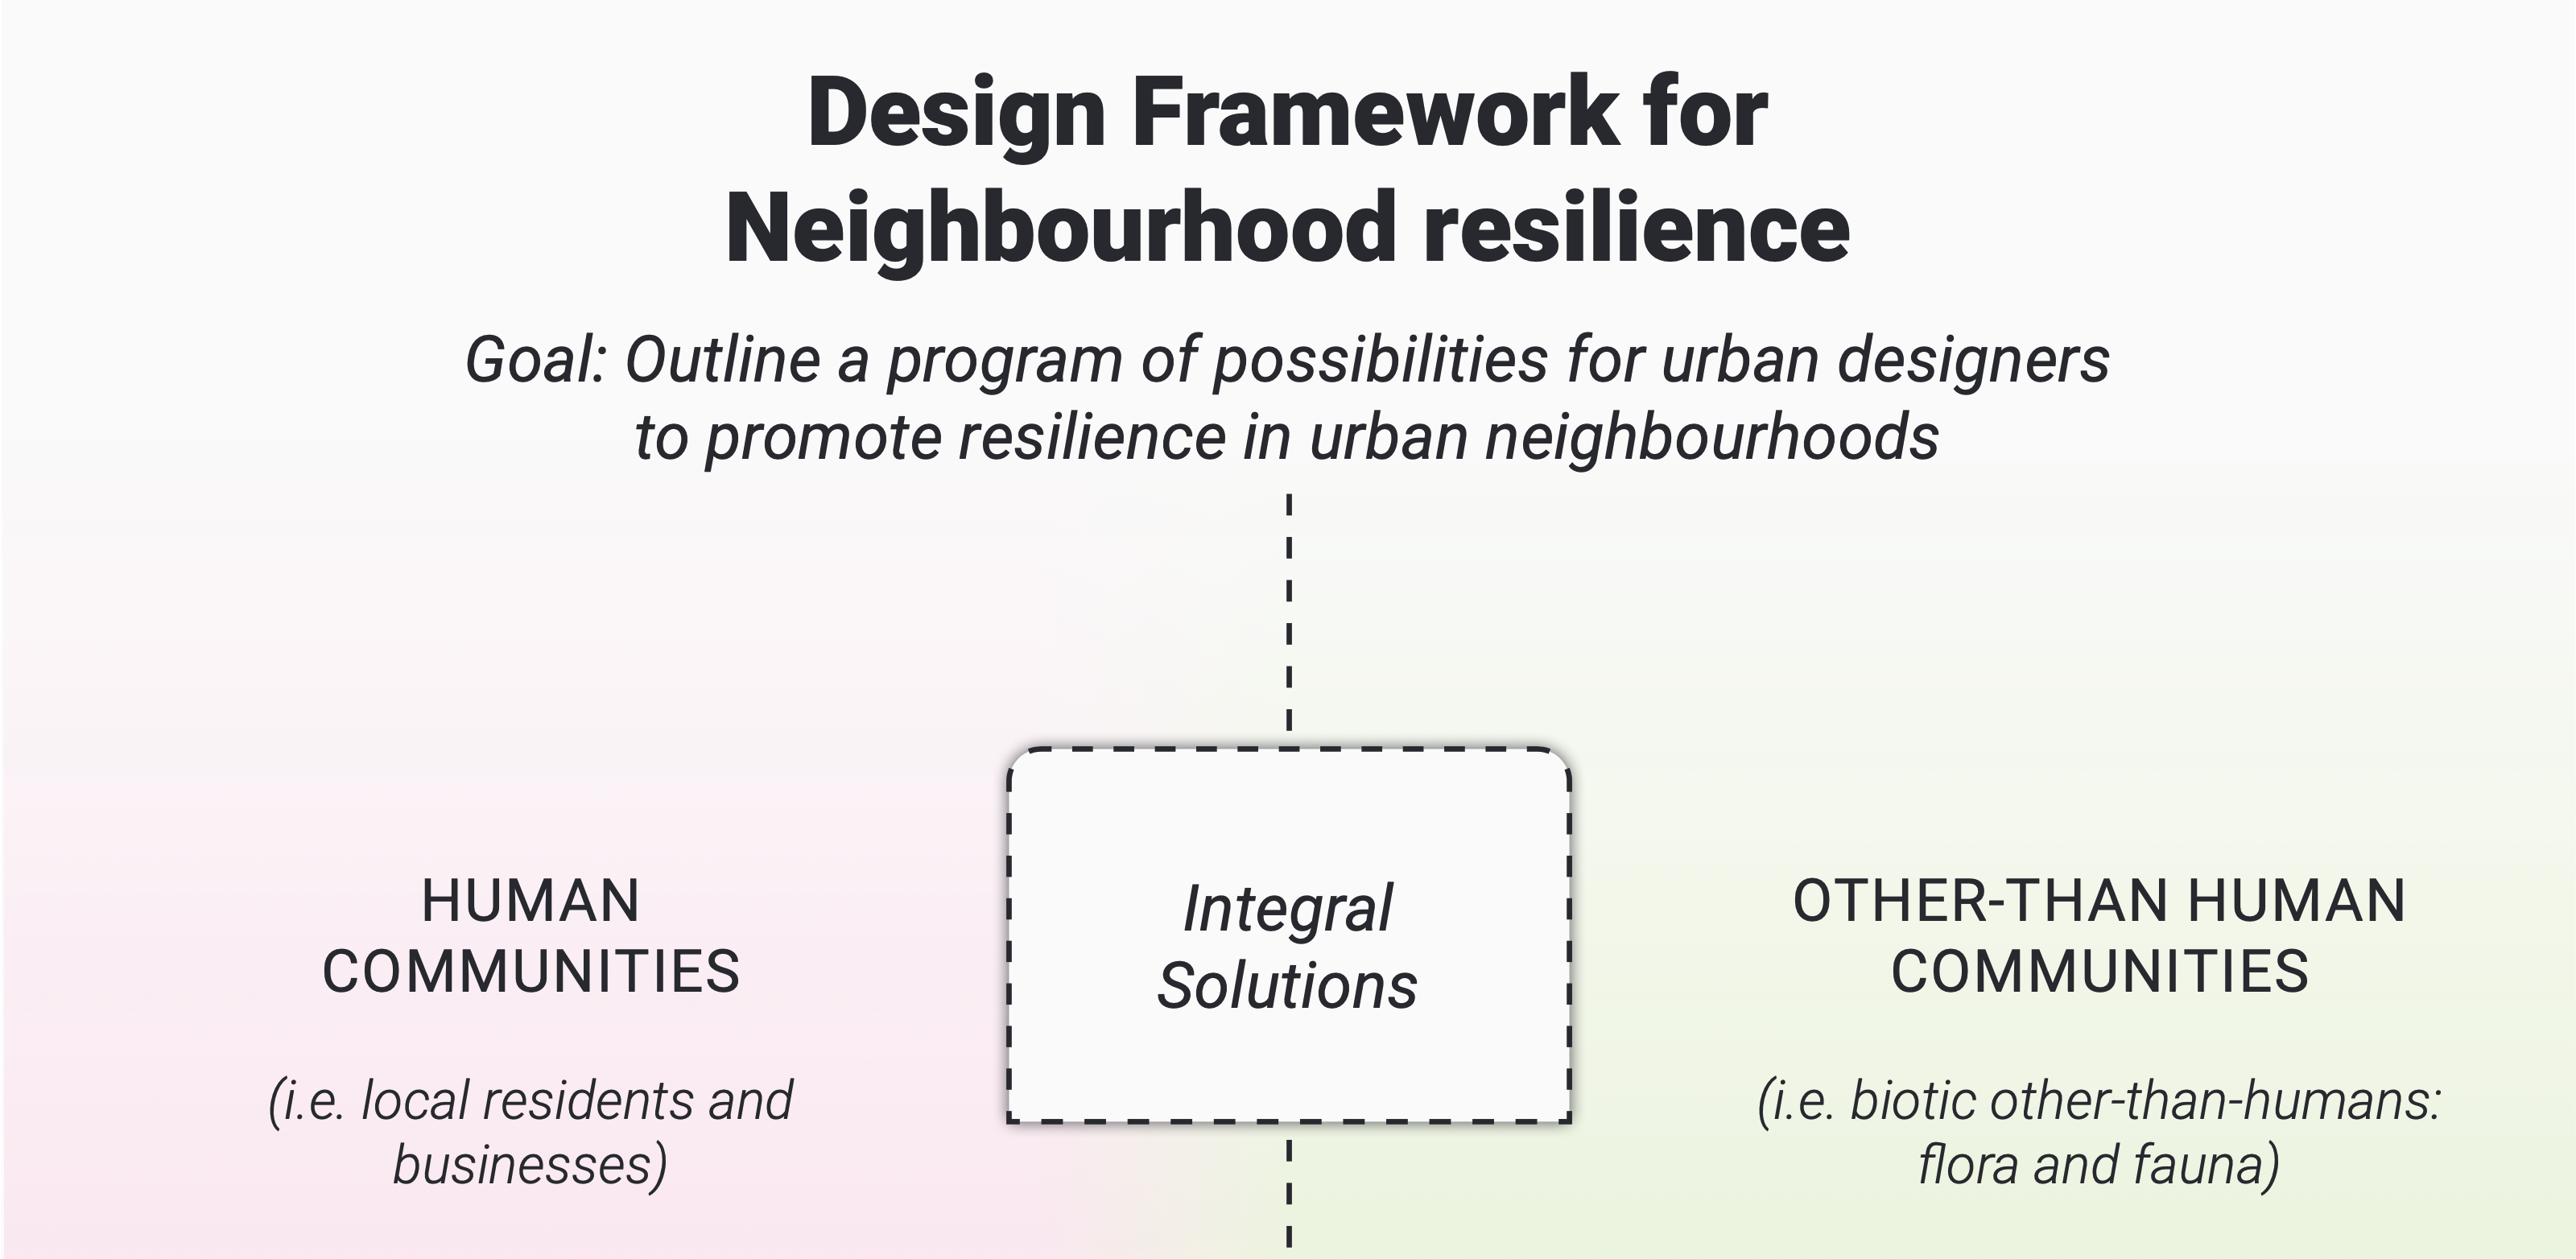 Design Framework for Neighbourhood Resilience: Combining human and other-than-human perspectives into an integrated approach